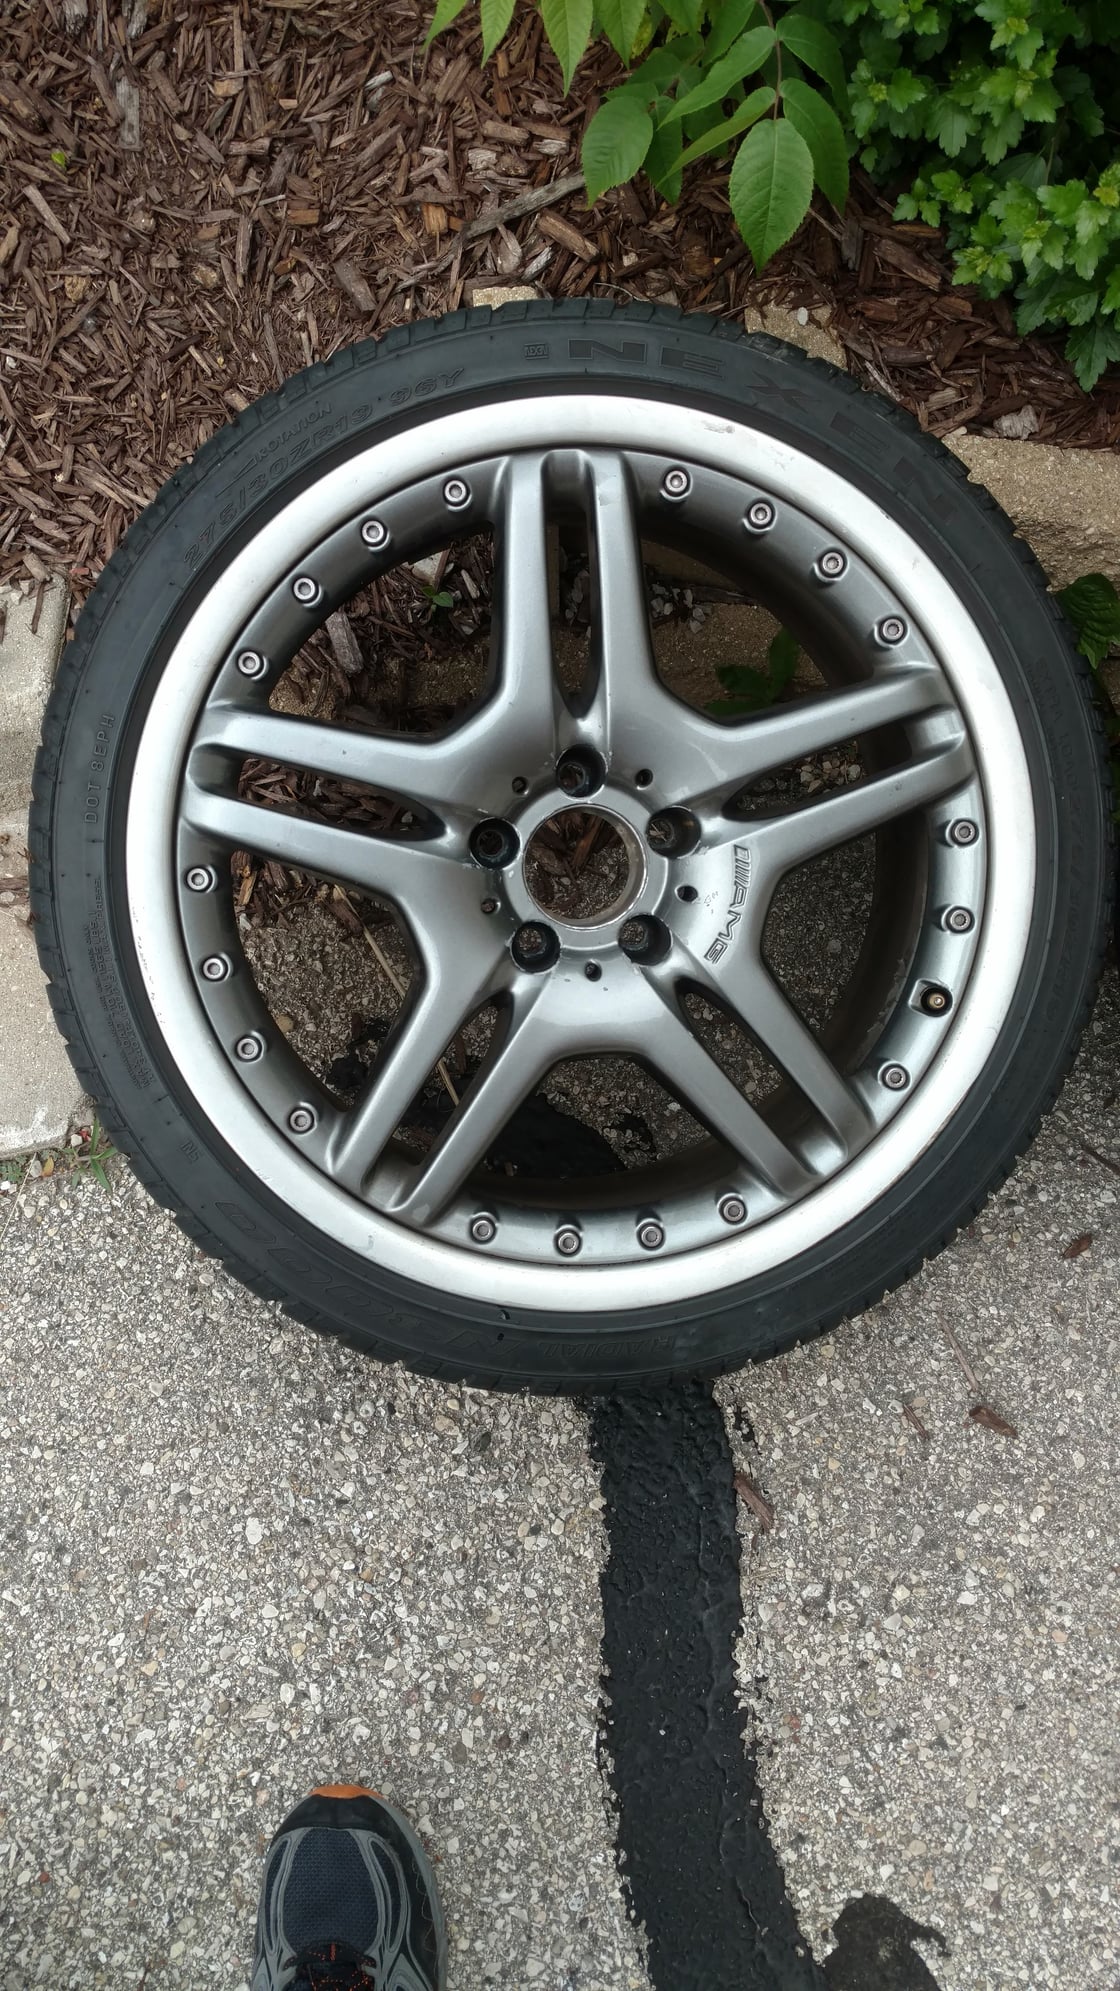 Wheels and Tires/Axles - SL 65 AMG Wheels and tires - Used - All Years Mercedes-Benz All Models - Waukesha, WI 53186, United States